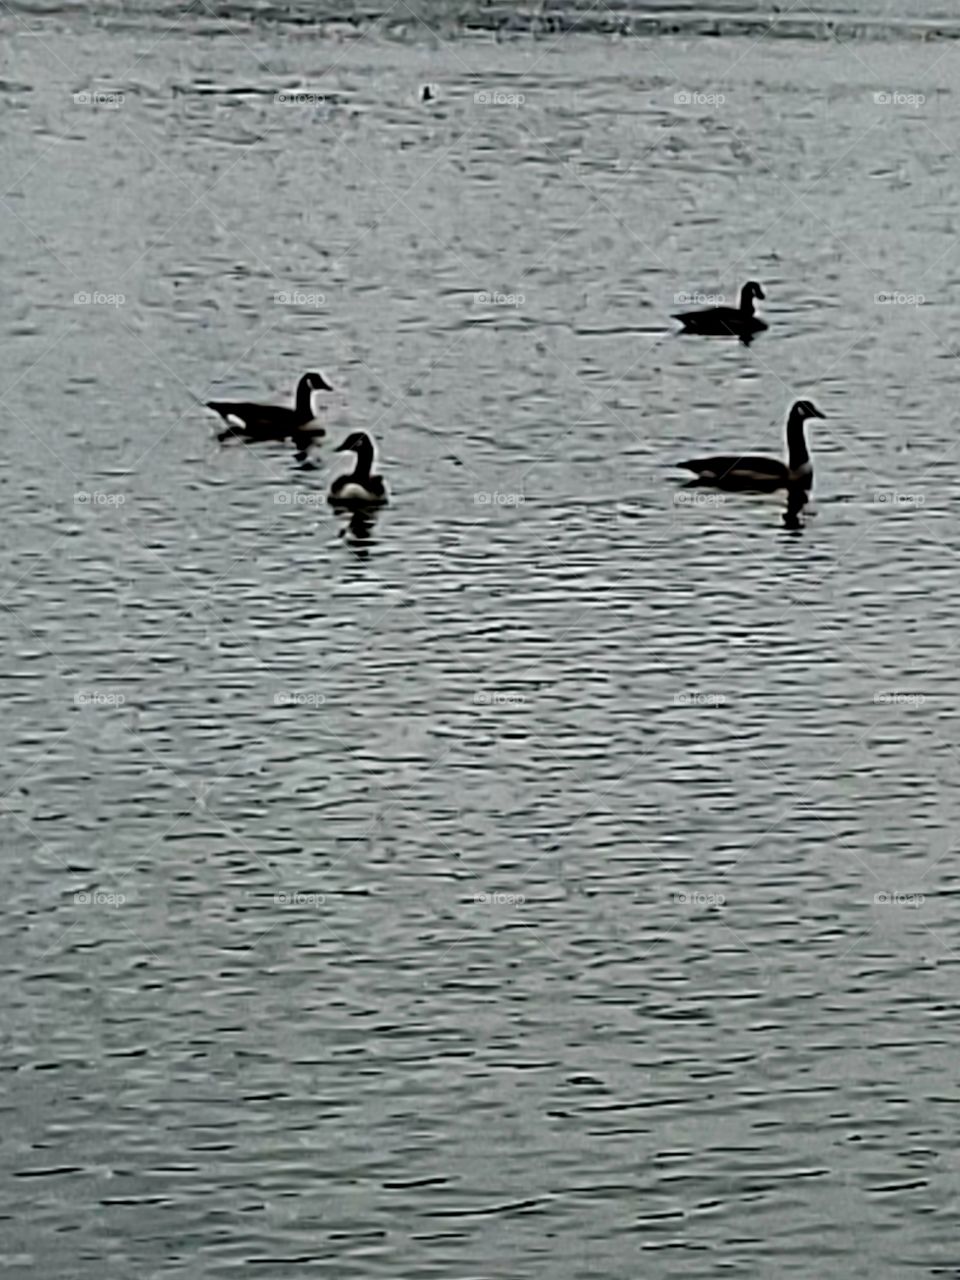 Canadian geese on the lake enjoying the peace.